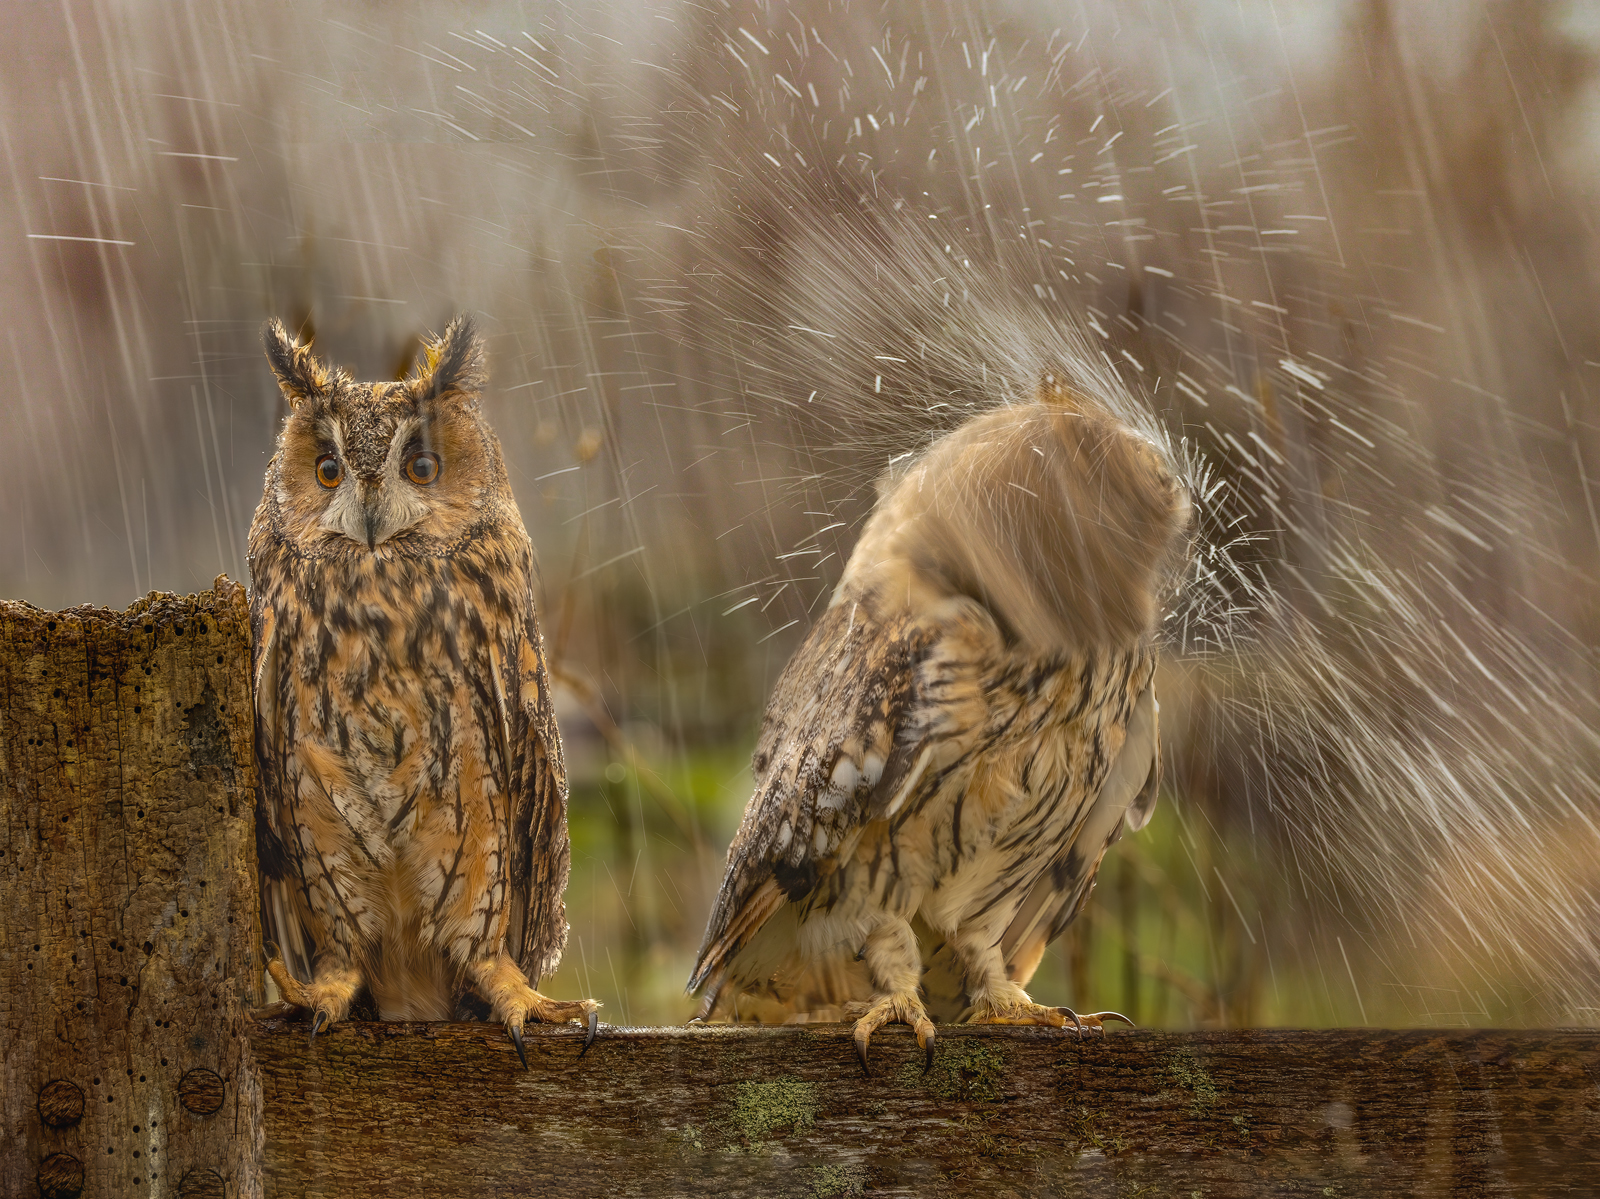 10-Owls-in-the-Drenching-Rain-by-Robert-Ayto